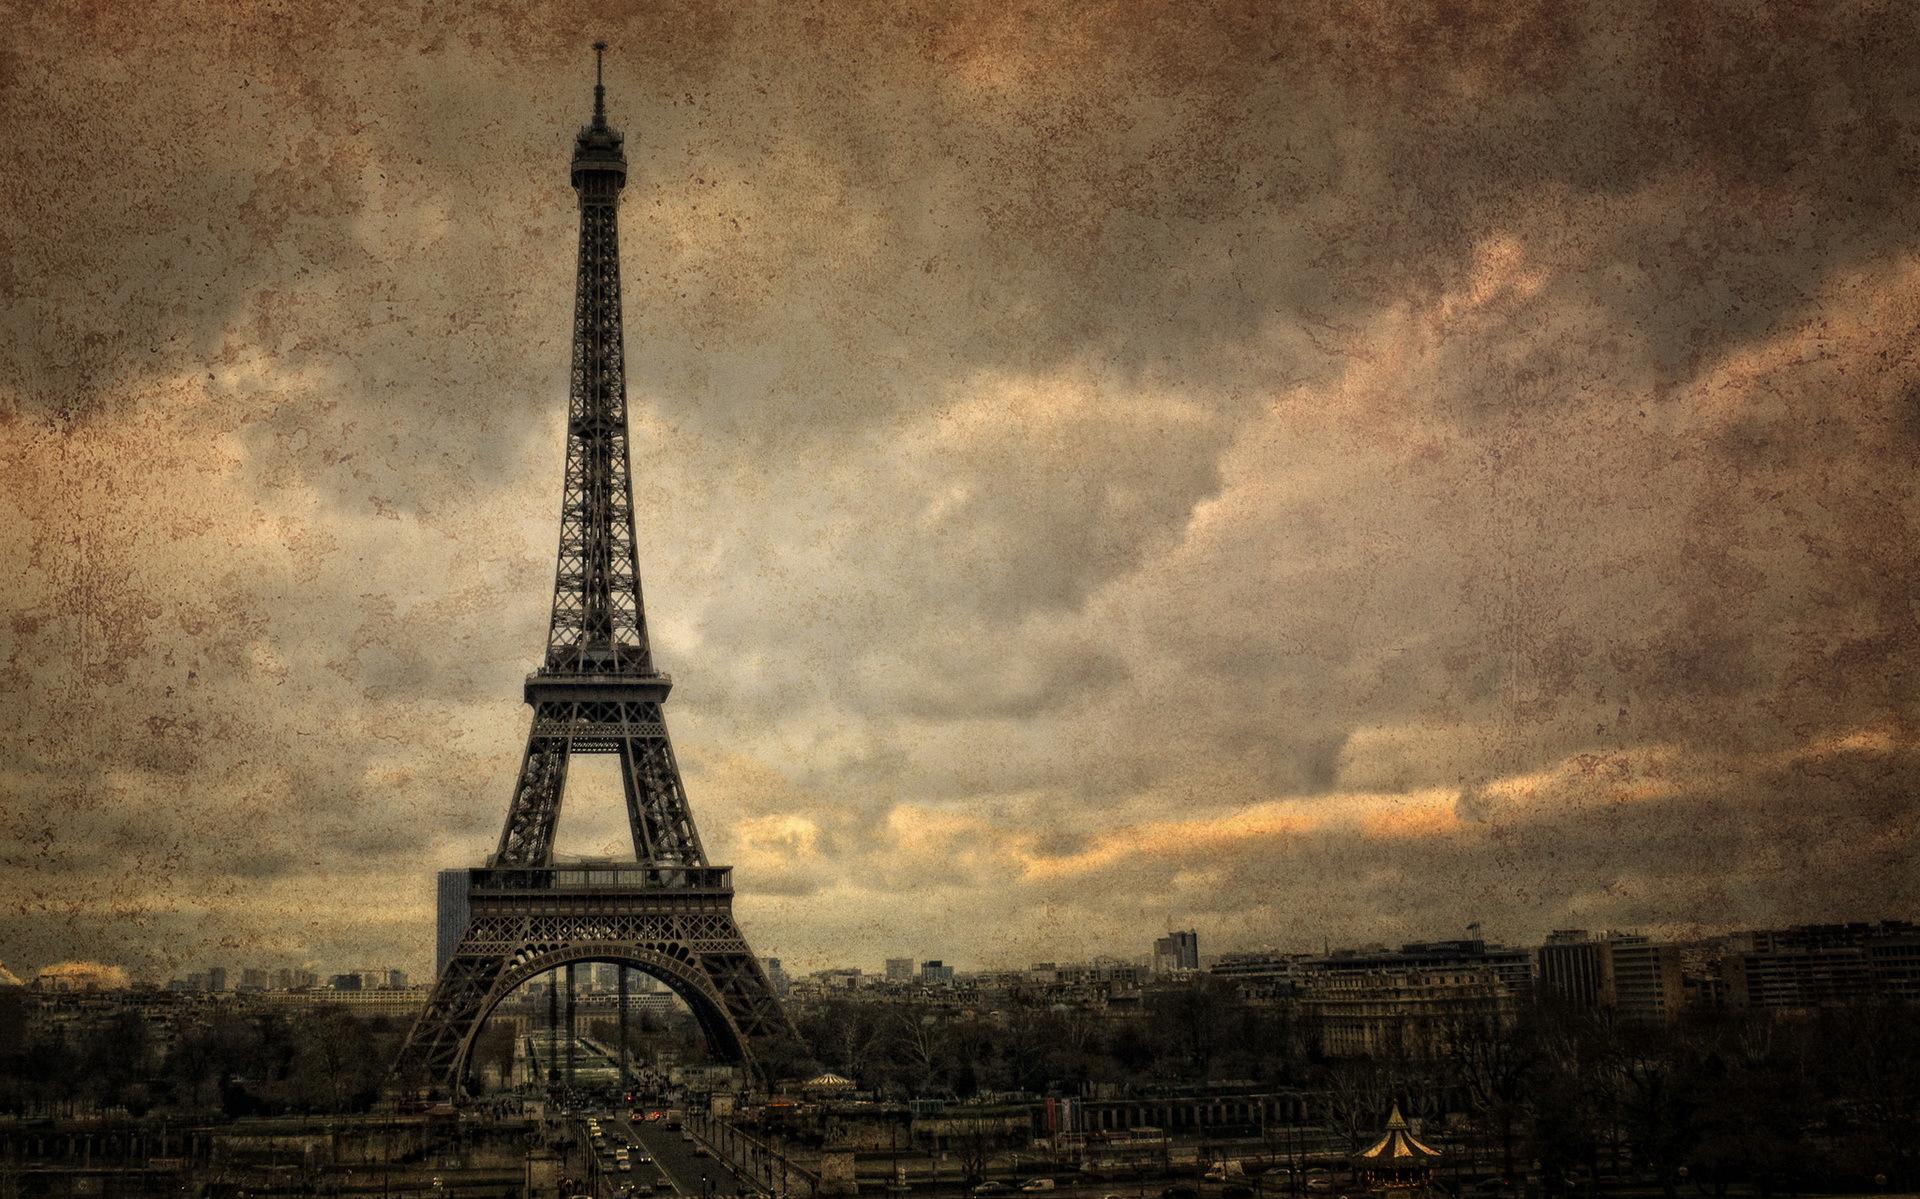 Free download Gallery For gt Vintage Eiffel Tower Wallpaper